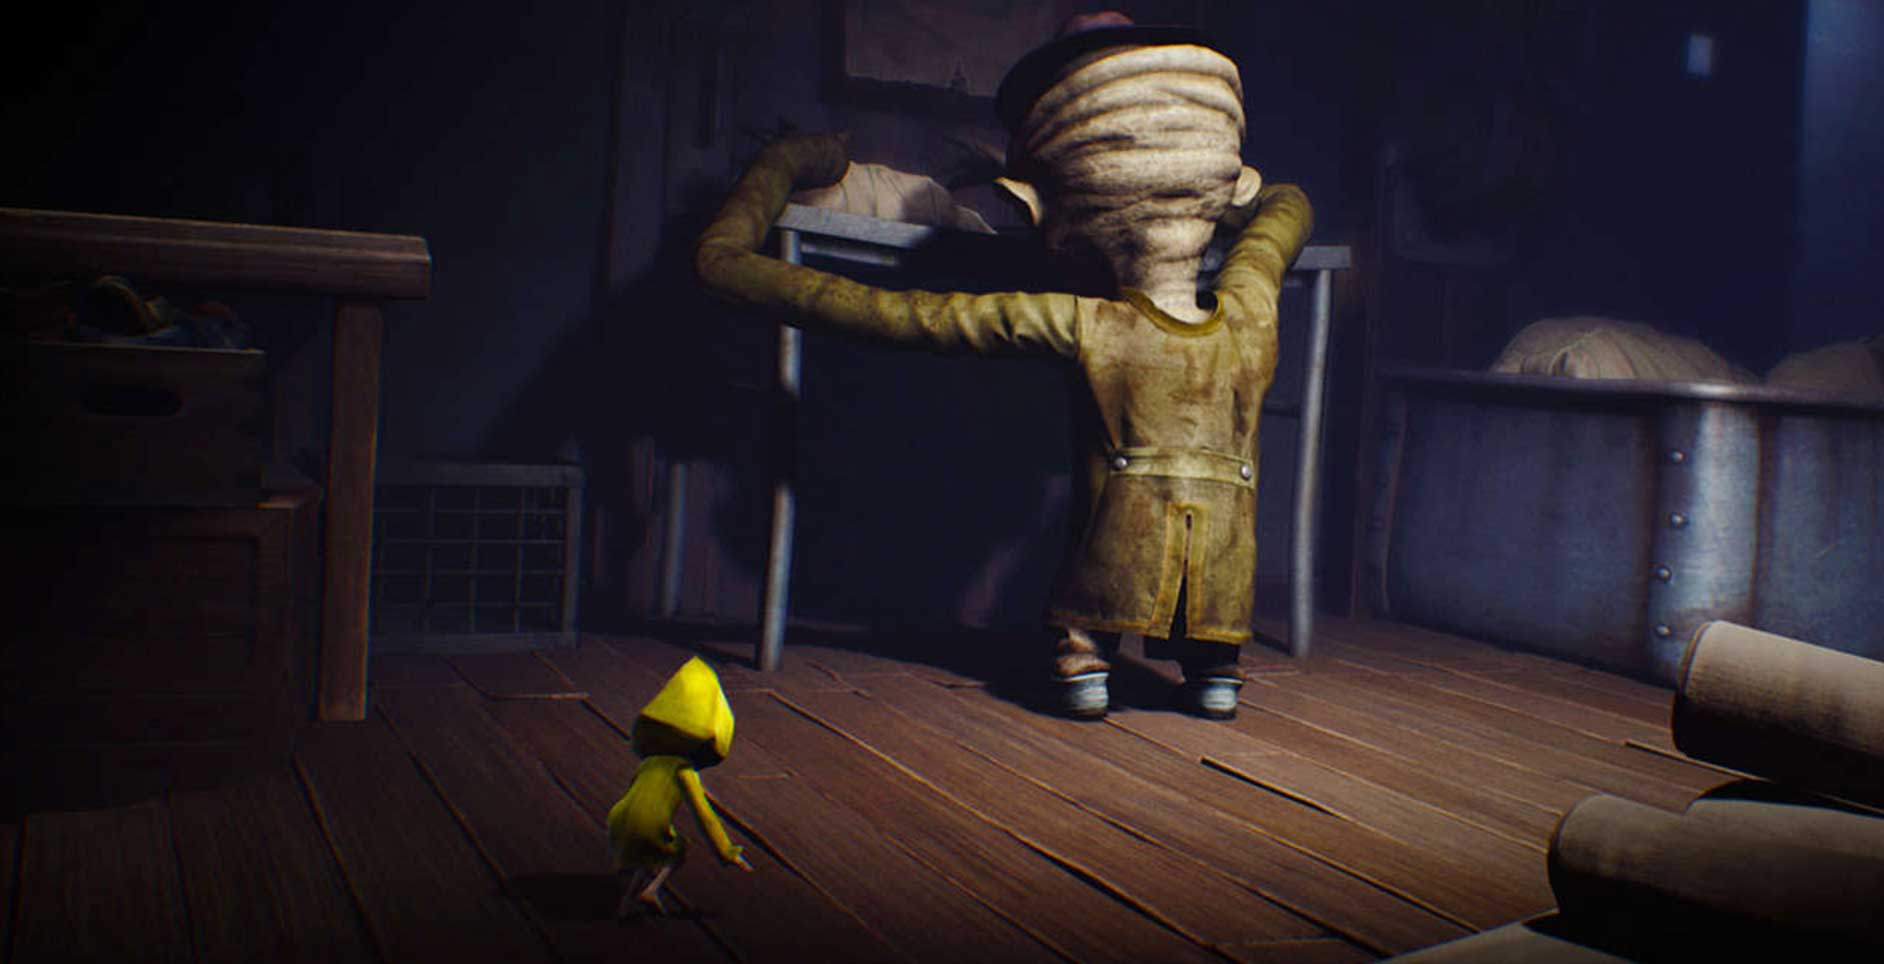 little nightmares 2 switch